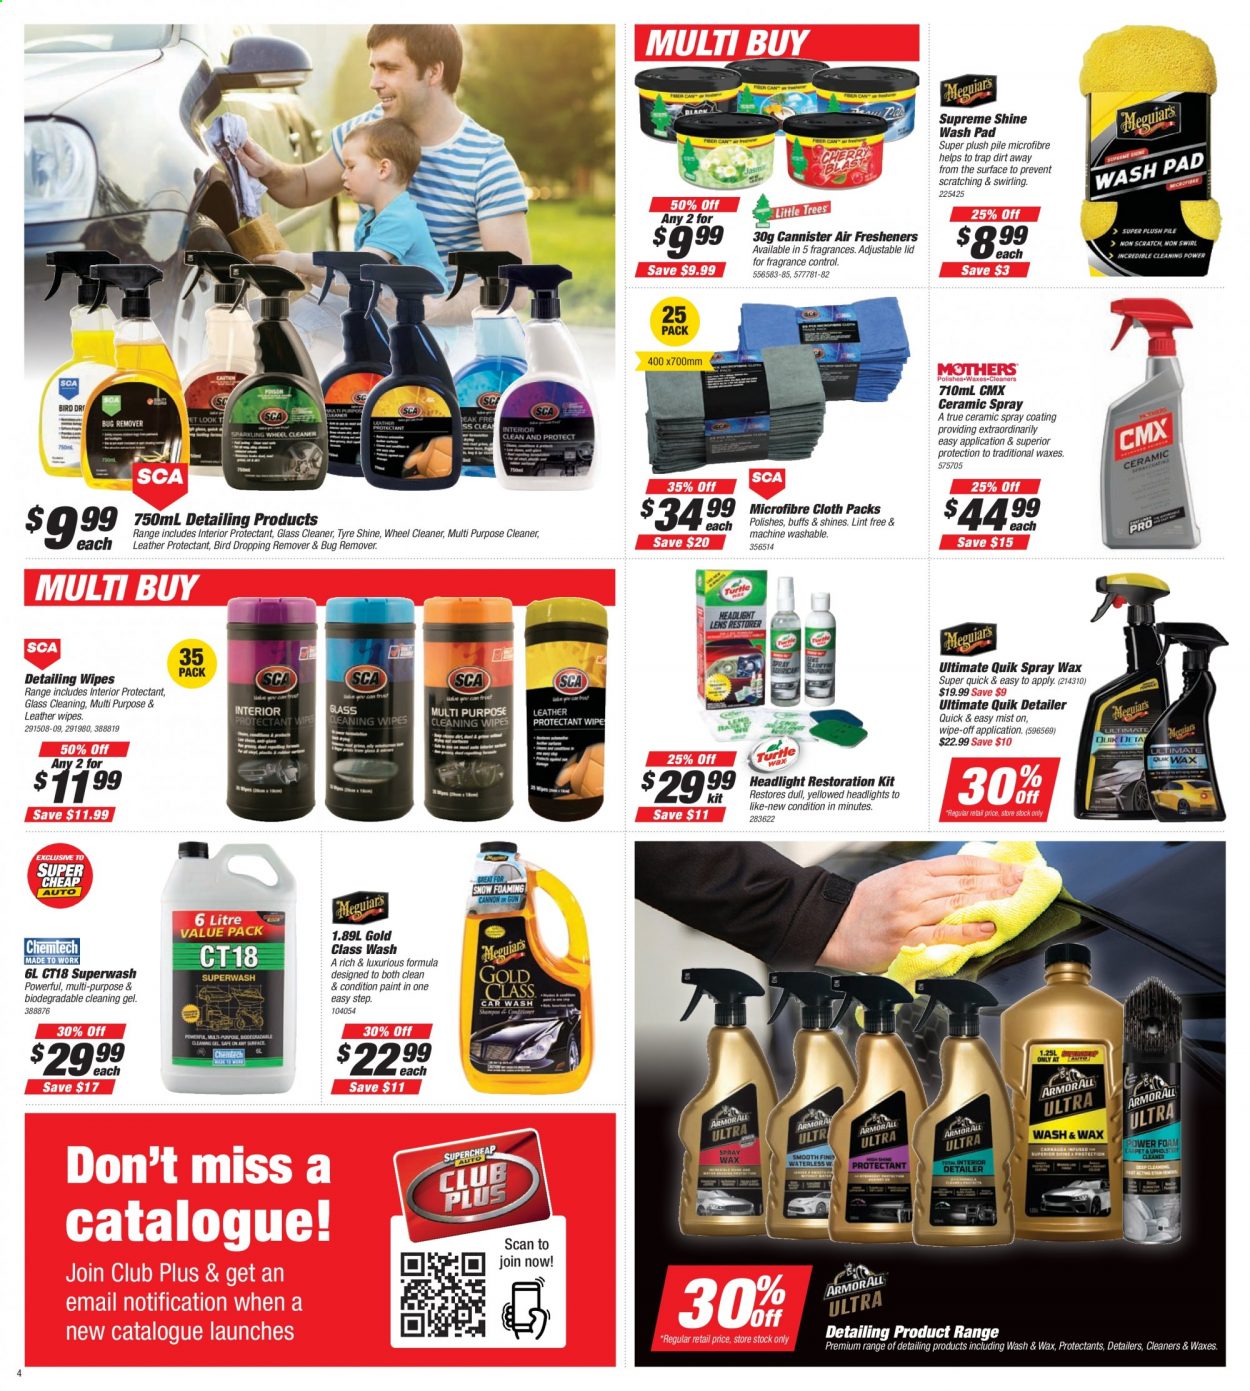 thumbnail - Supercheap Auto Catalogue - 12 Aug 2021 - 22 Aug 2021 - Sales products - Nike, cleansing wipes, wipes, cleaner, glass cleaner, air freshener, tyre shine, headlamp. Page 4.